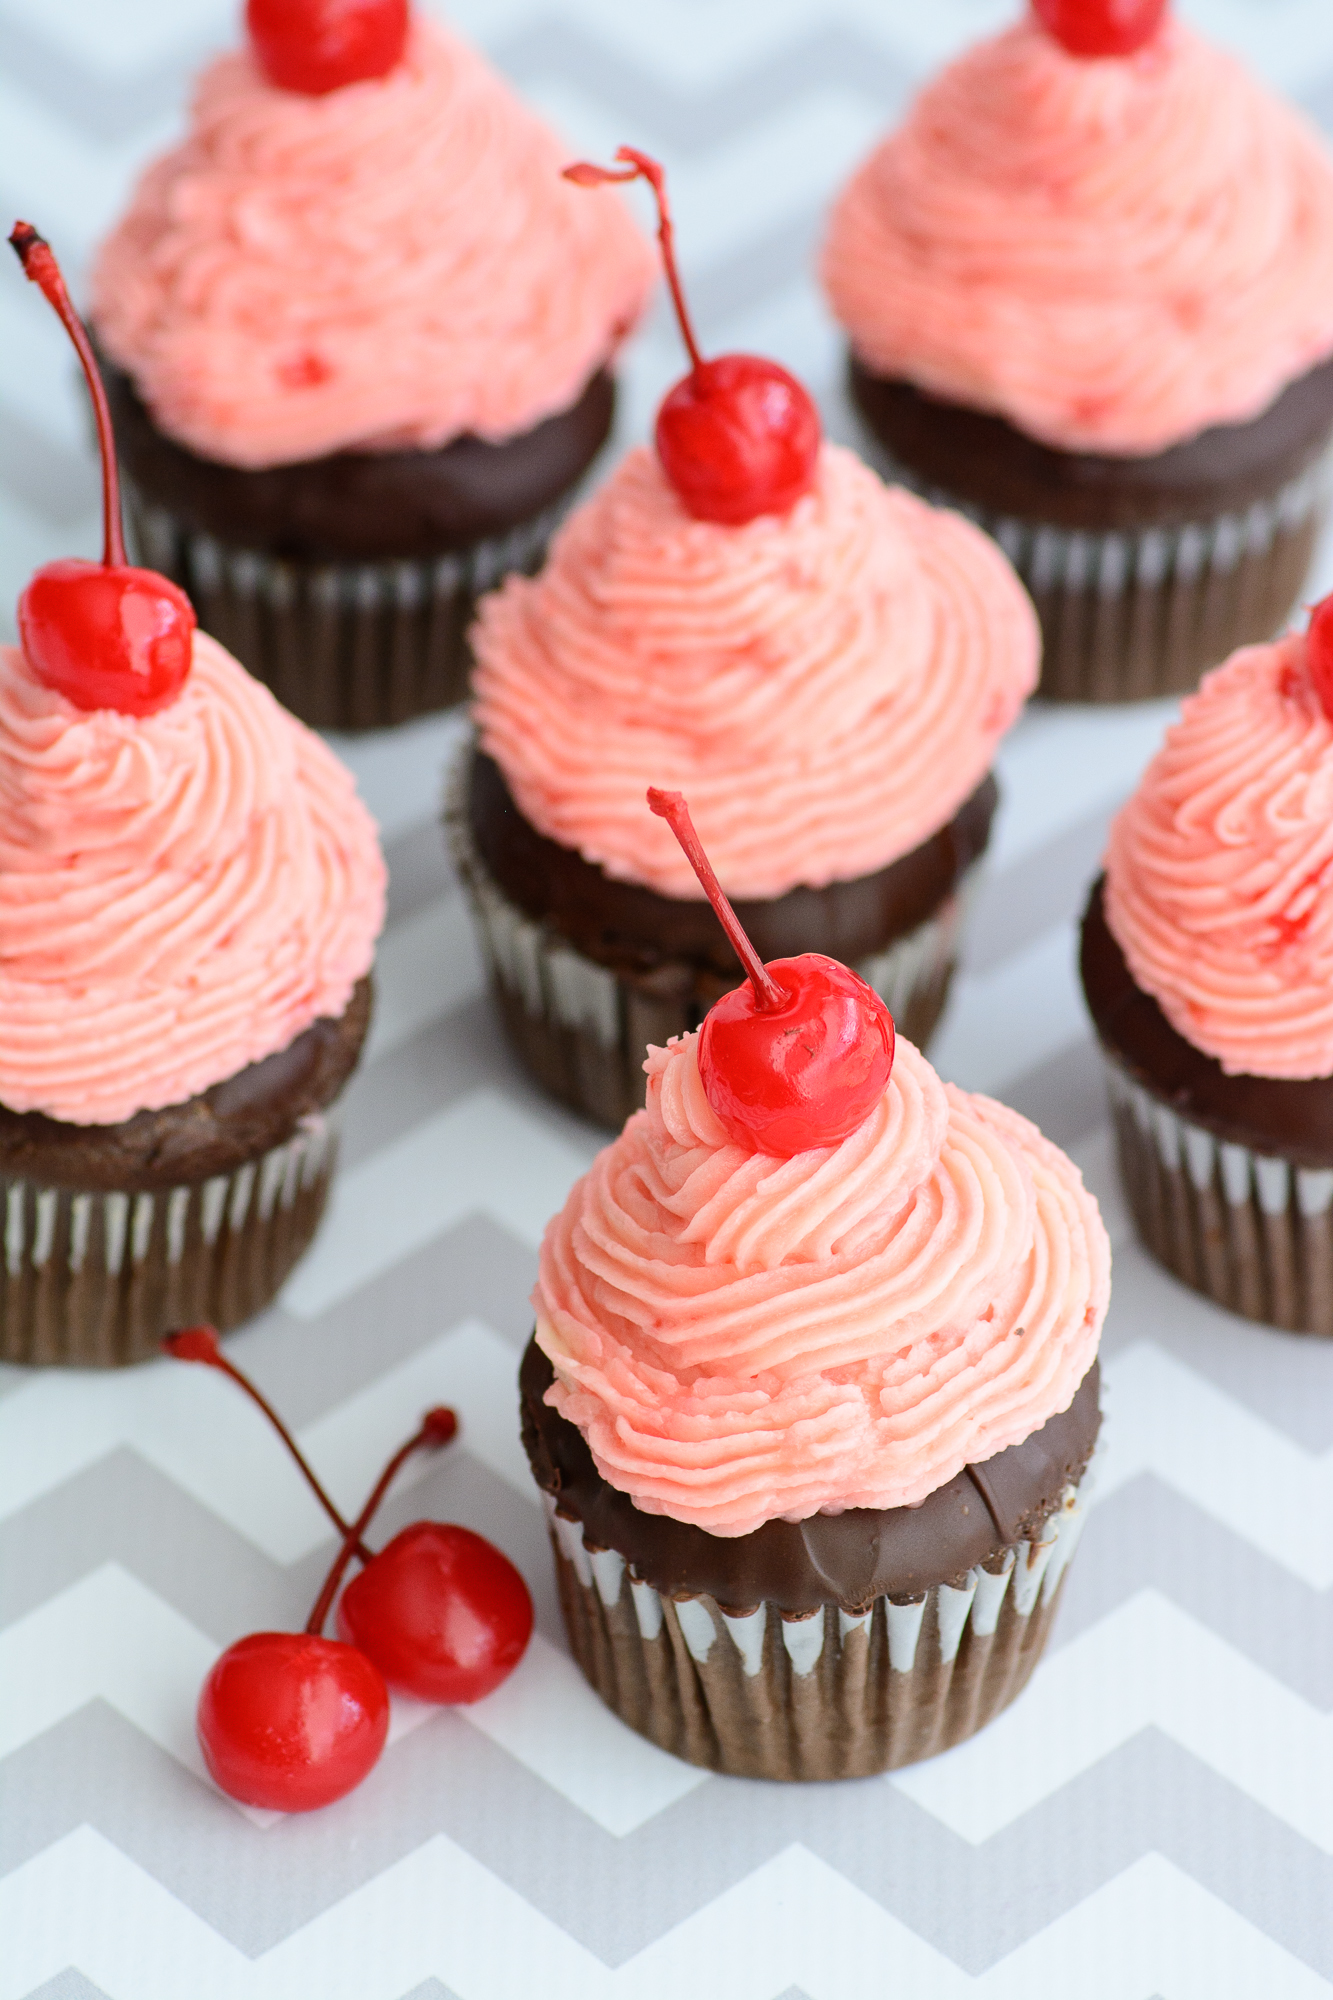 Chocolate Cherry Cupcakes are one of my favourite cupcake flavour combinations ever. 